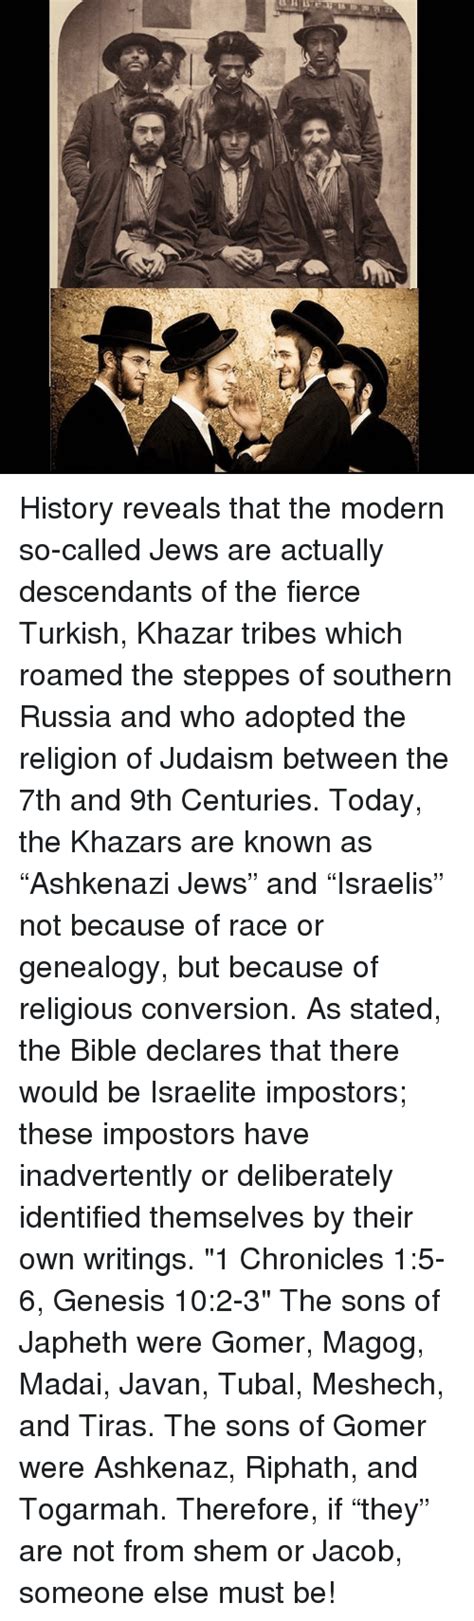 History Reveals That the Modern So-Called Jews Are Actually Descendants ...